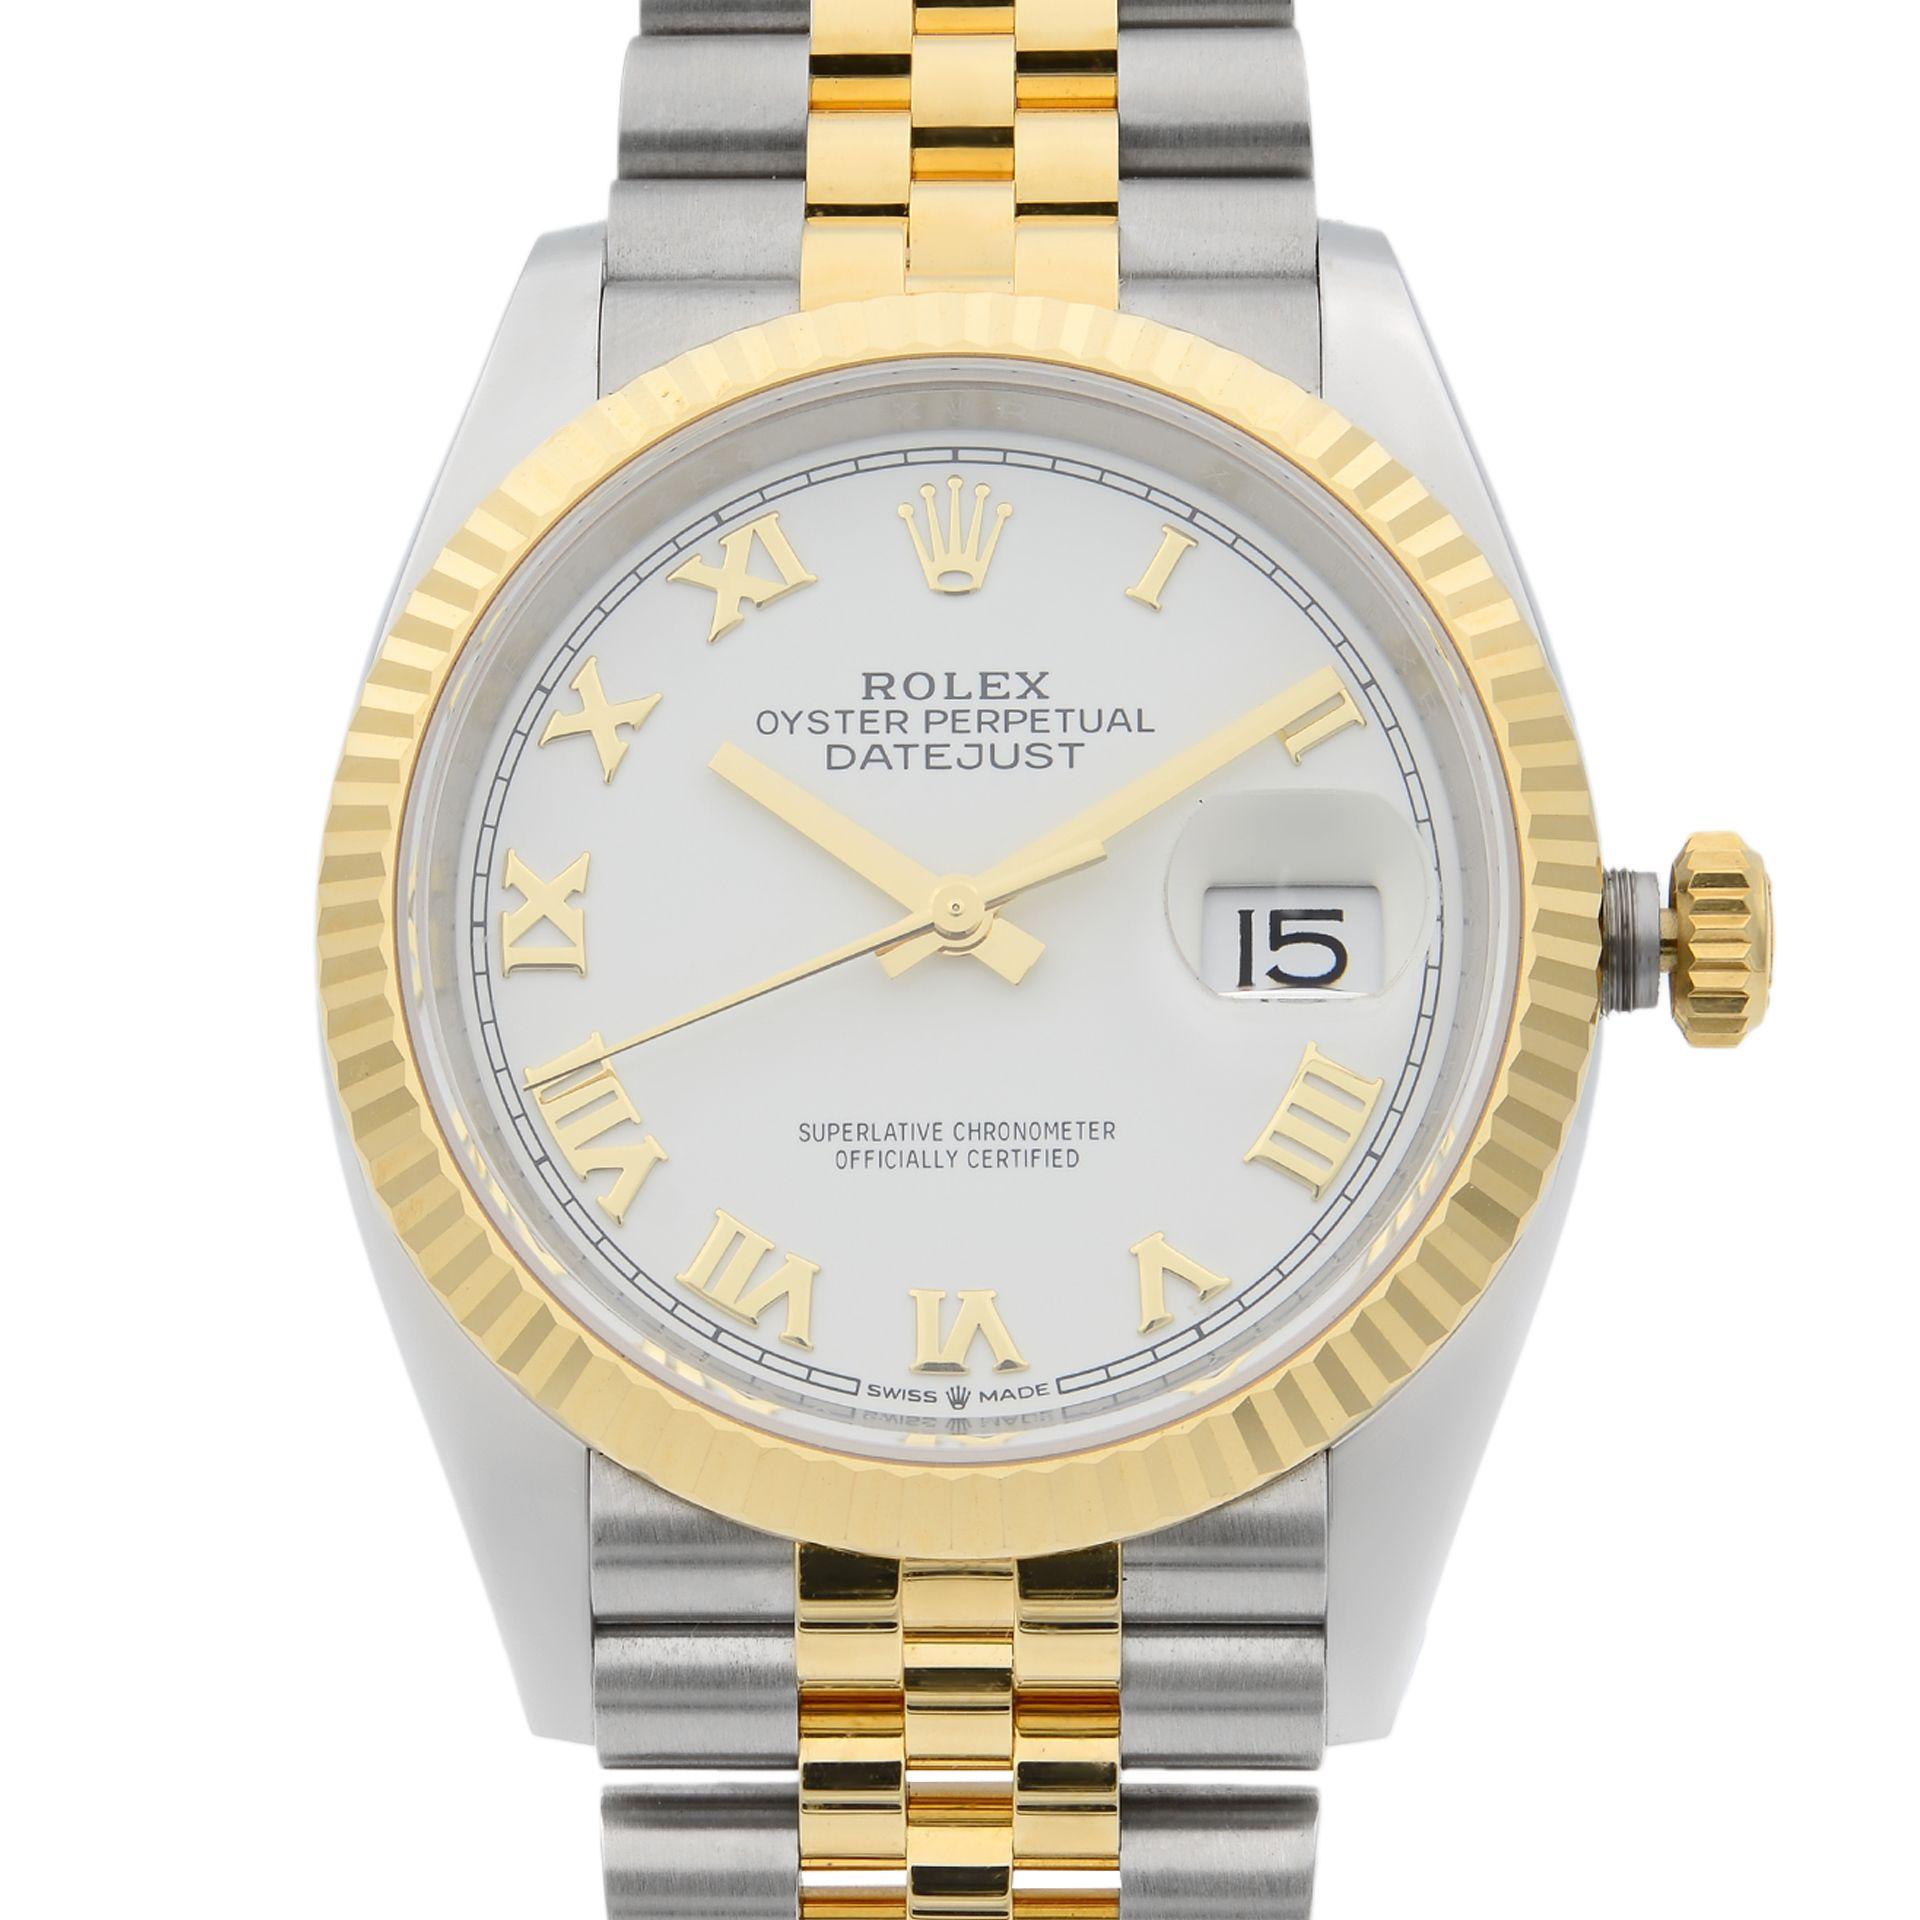 This display model Rolex Datejust  126233 is a beautiful men's timepiece that is powered by mechanical (automatic) movement which is cased in a stainless steel case. It has a round shape face, date indicator dial and has hand roman numerals style